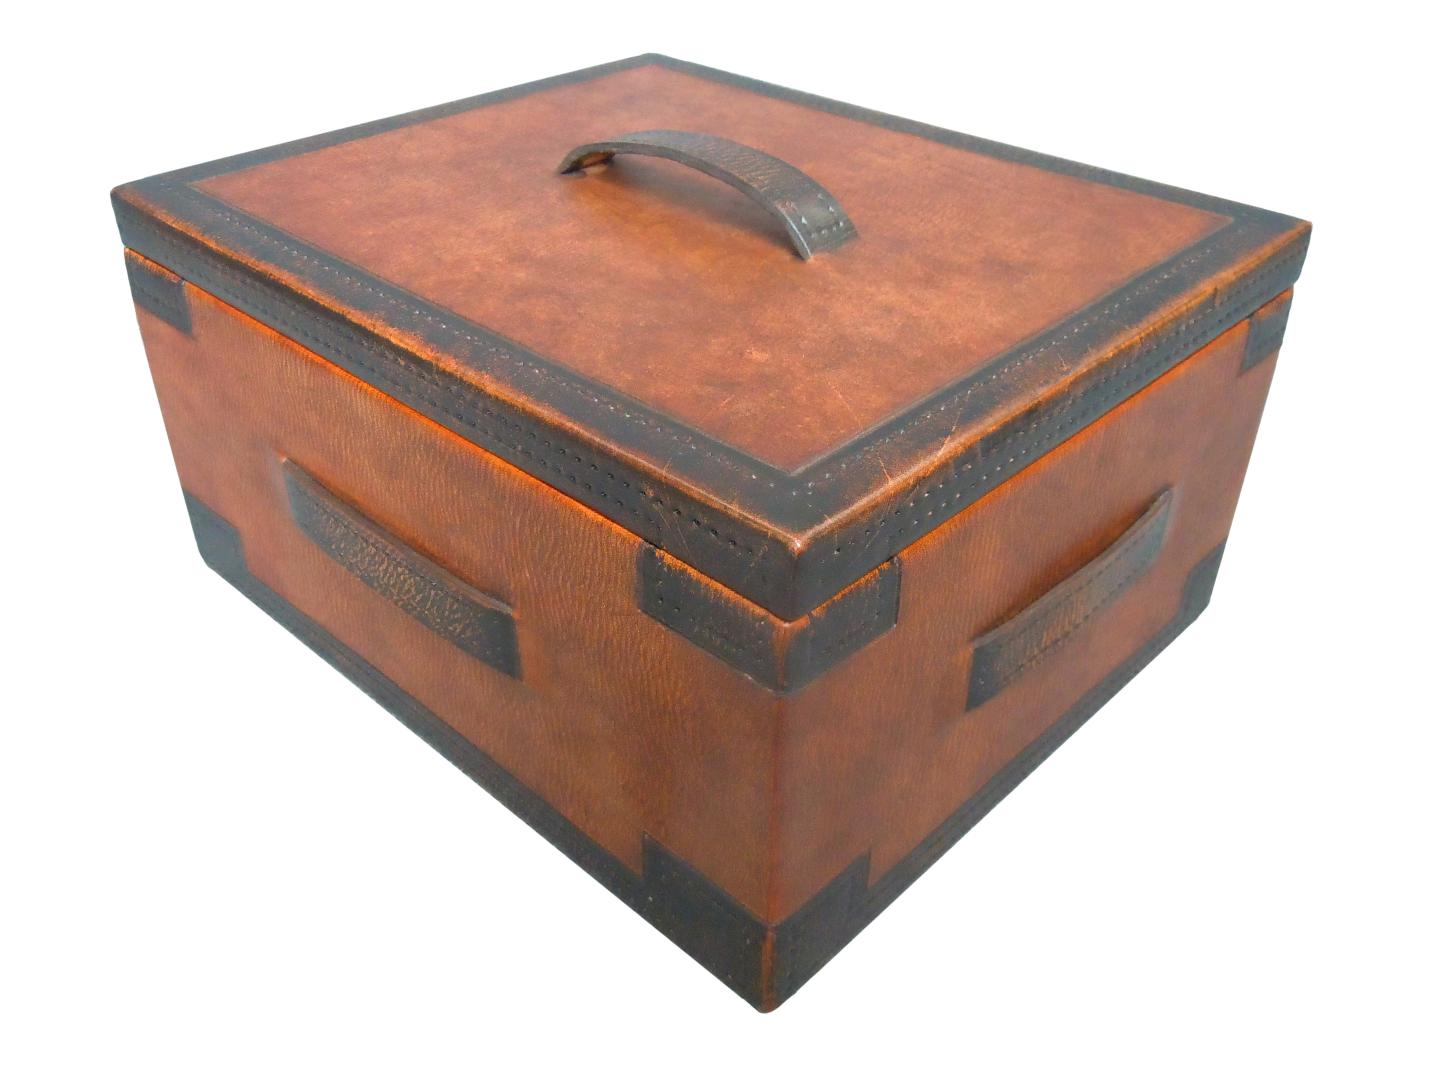 leather box with belts on the sides and top of the box